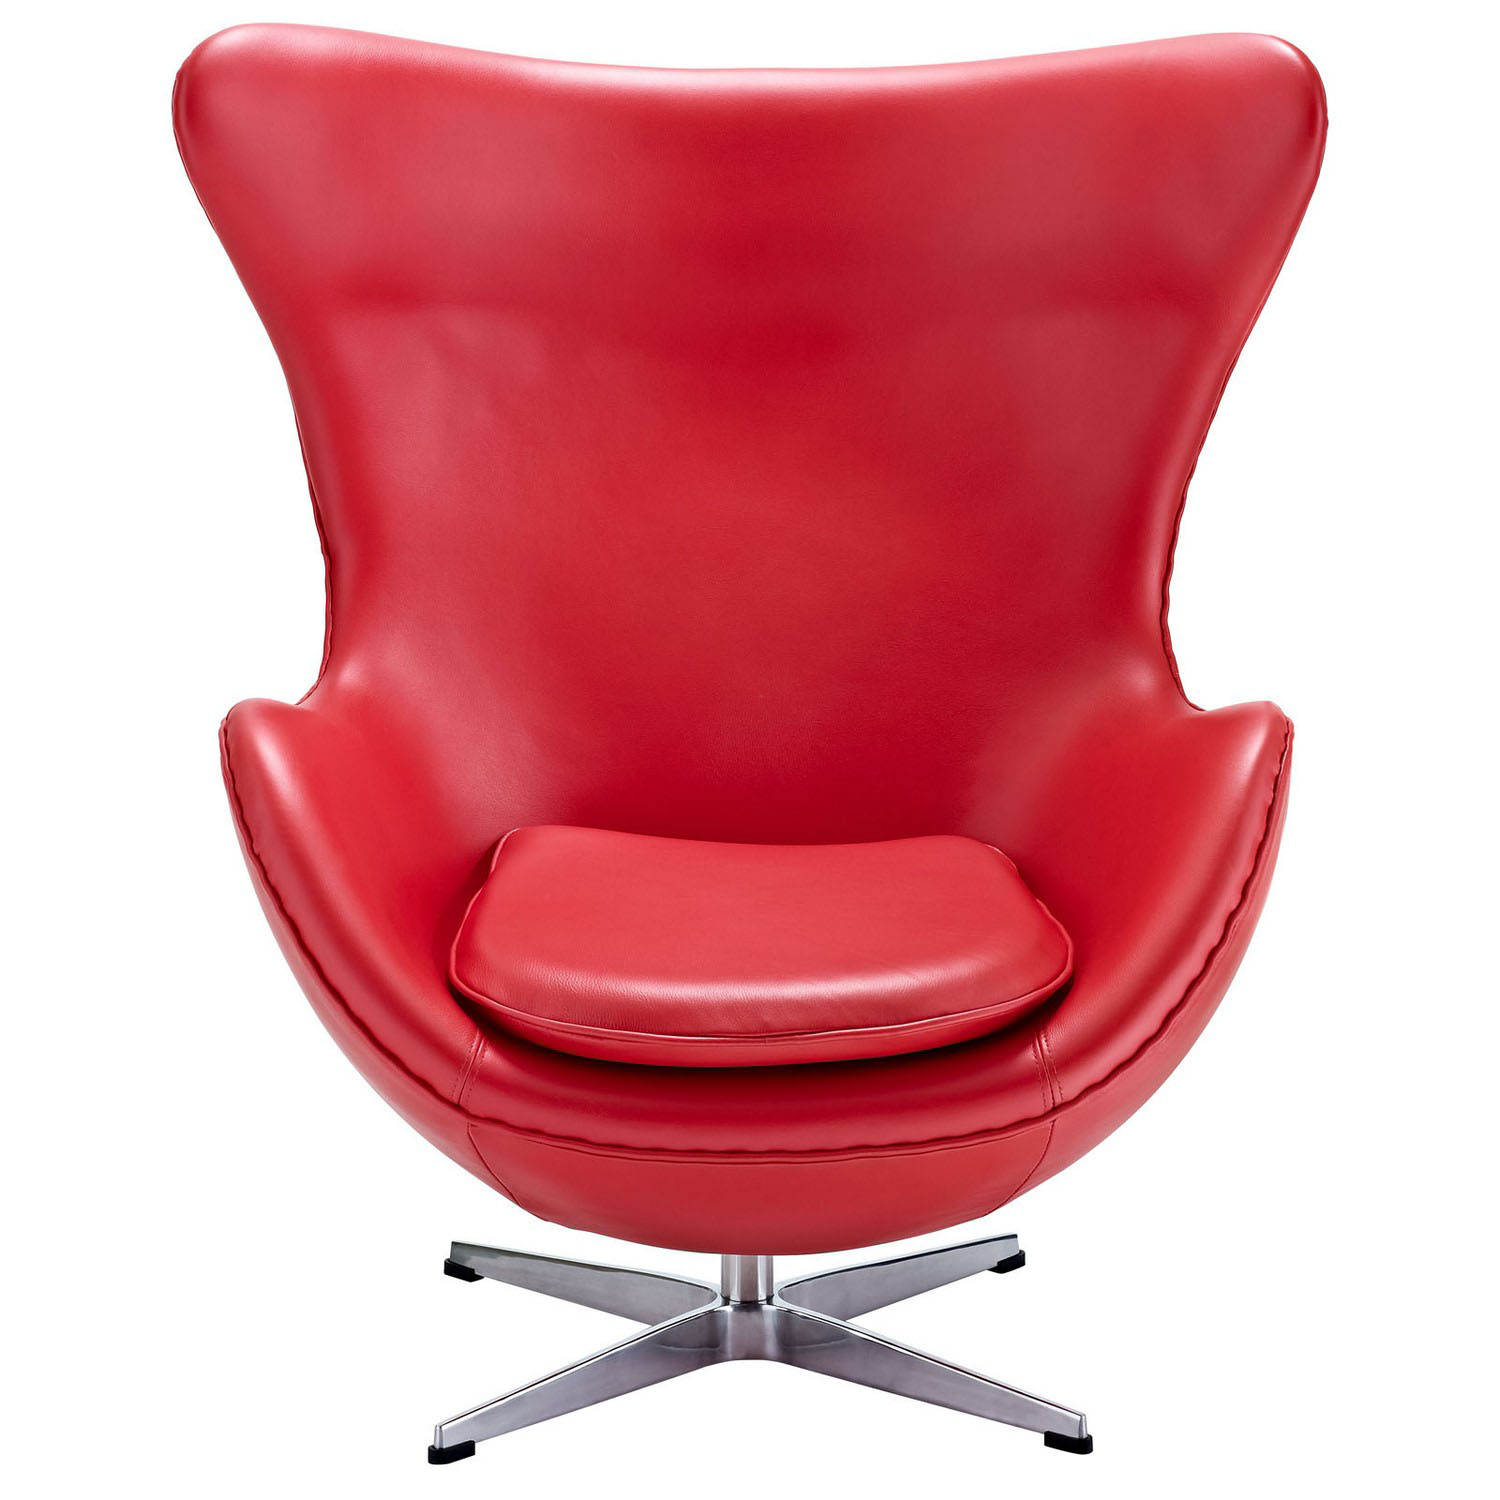 Modway Glove Leather Lounge Chair - Red